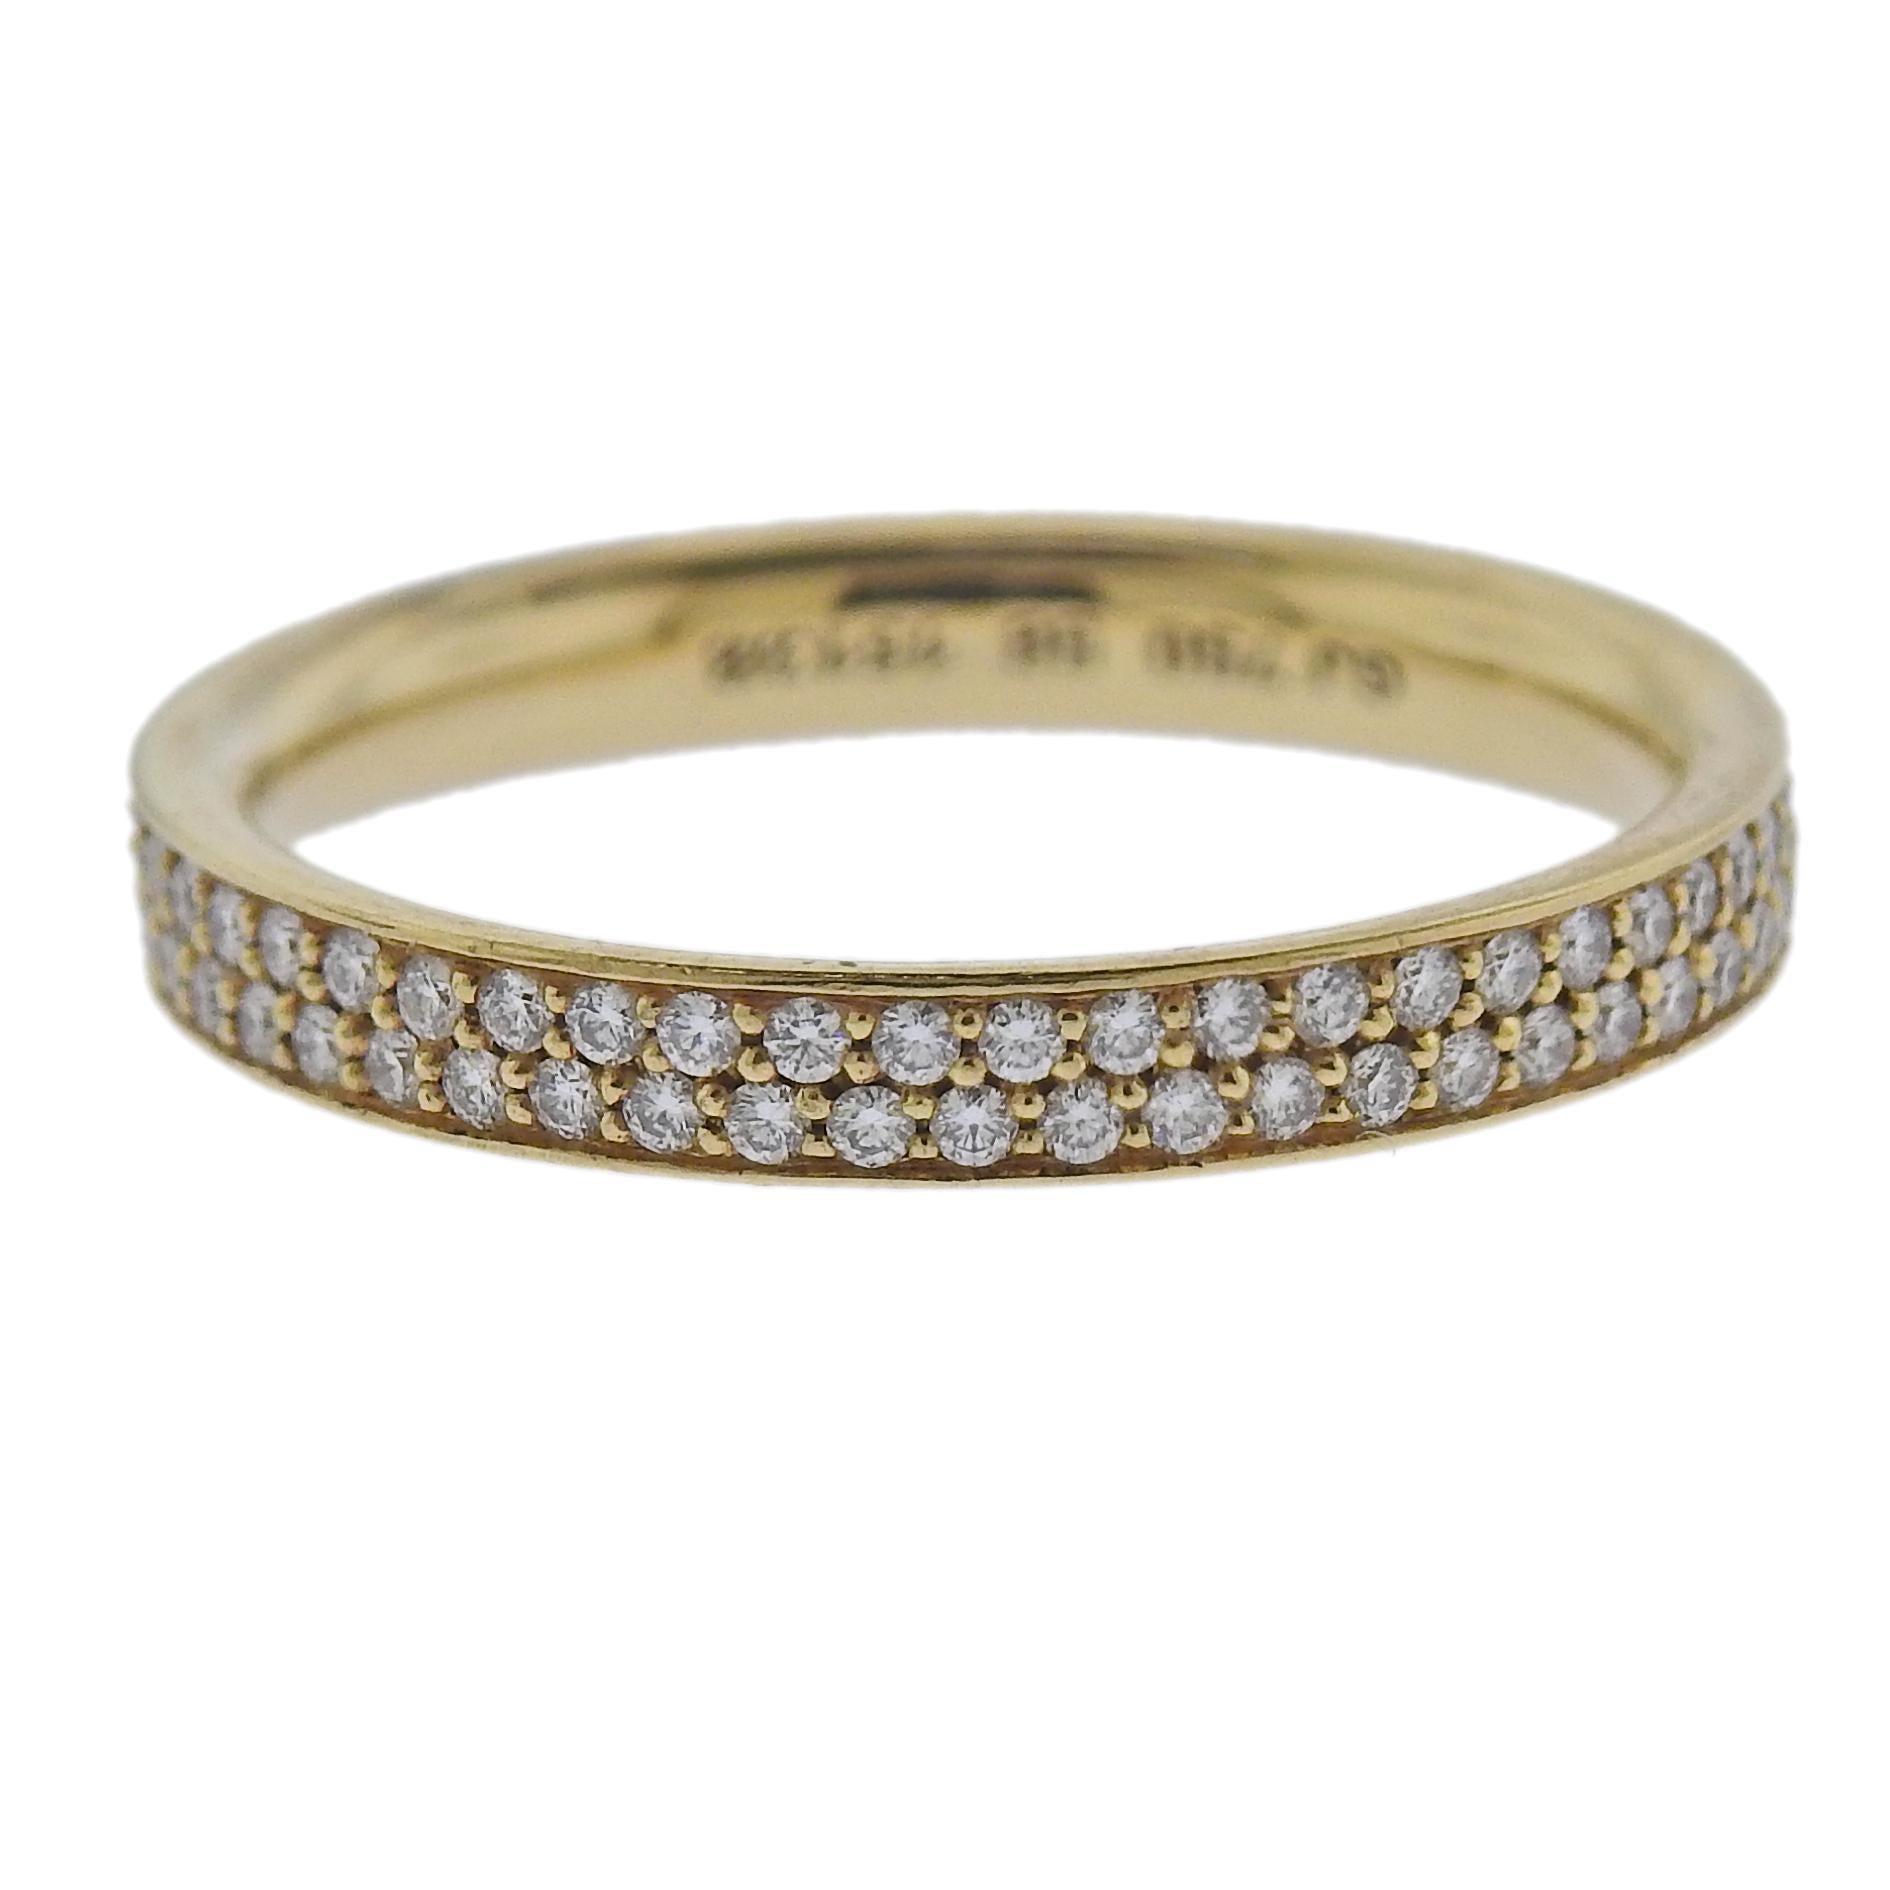 Brand new Georg Jensen 18K yellow gold double row diamond pave band ring set with 0.55ctw of G/VS diamonds. Ring measures 3mm wide and available in following sizes: 52,53,54,55,56. Model# 3570200. Marked: GJ, 750, ring size, 1513 B. Weigt is 3.3